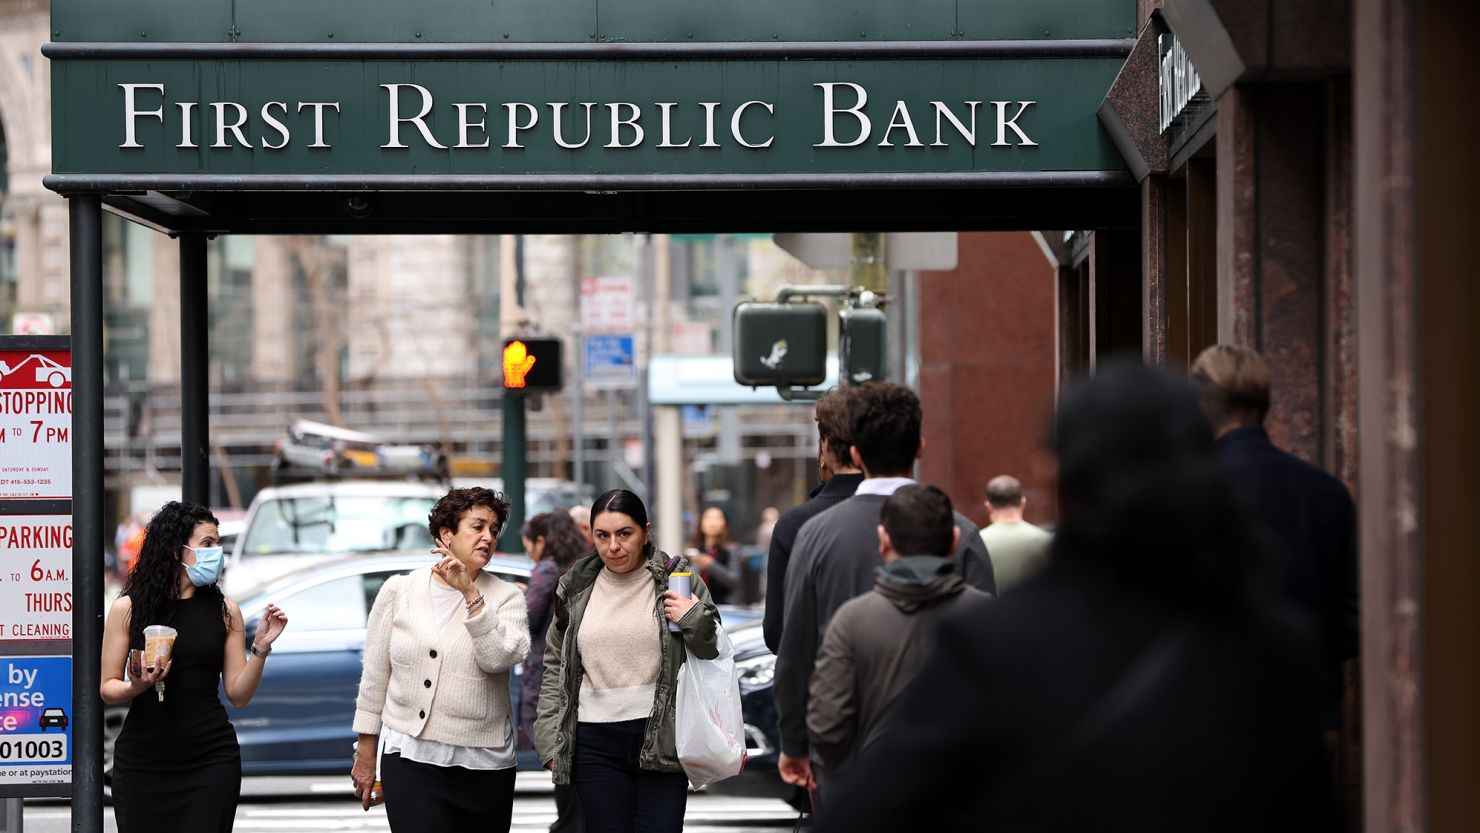 Shares of First Republic plunged more than 60% on Monday but were rebounding early Tuesday.